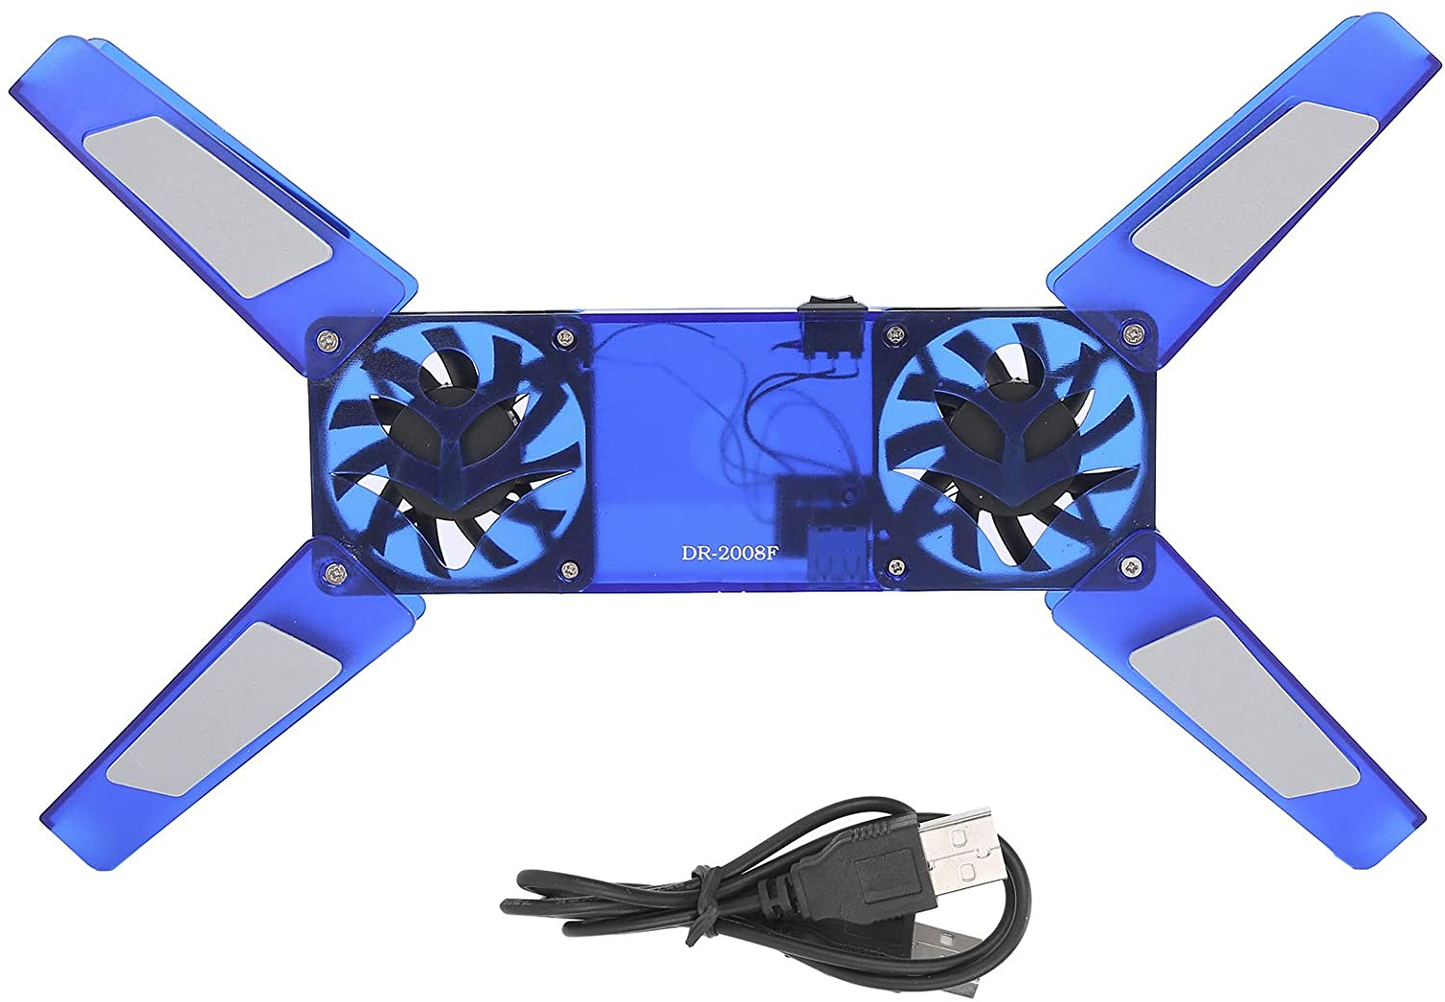 Laptop Cooling Stand, Laptop Cooler with 2 Fans, Foldable Laptop Cooling Fan Pad USB Cable Computer Supplies(Blue)